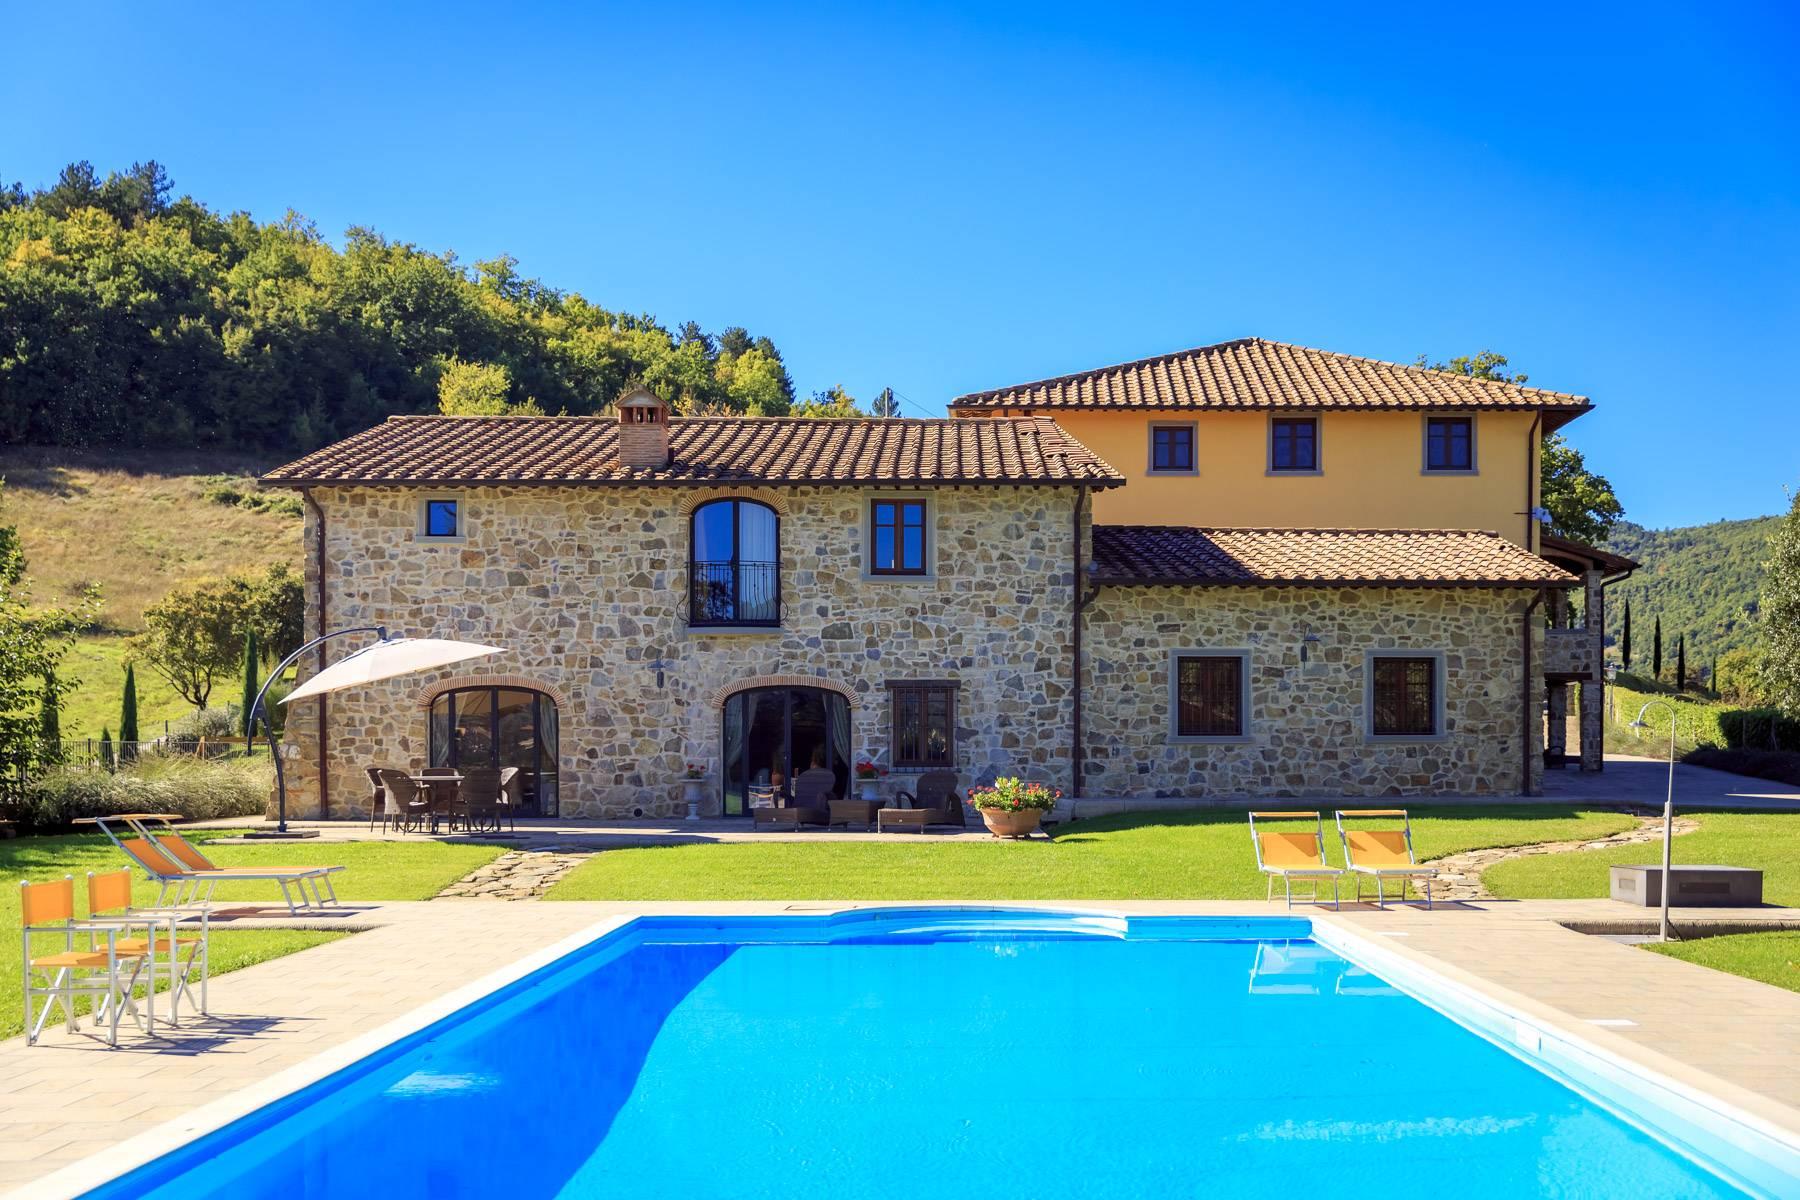 Marvelous estate with views over the Casentino valley - 1